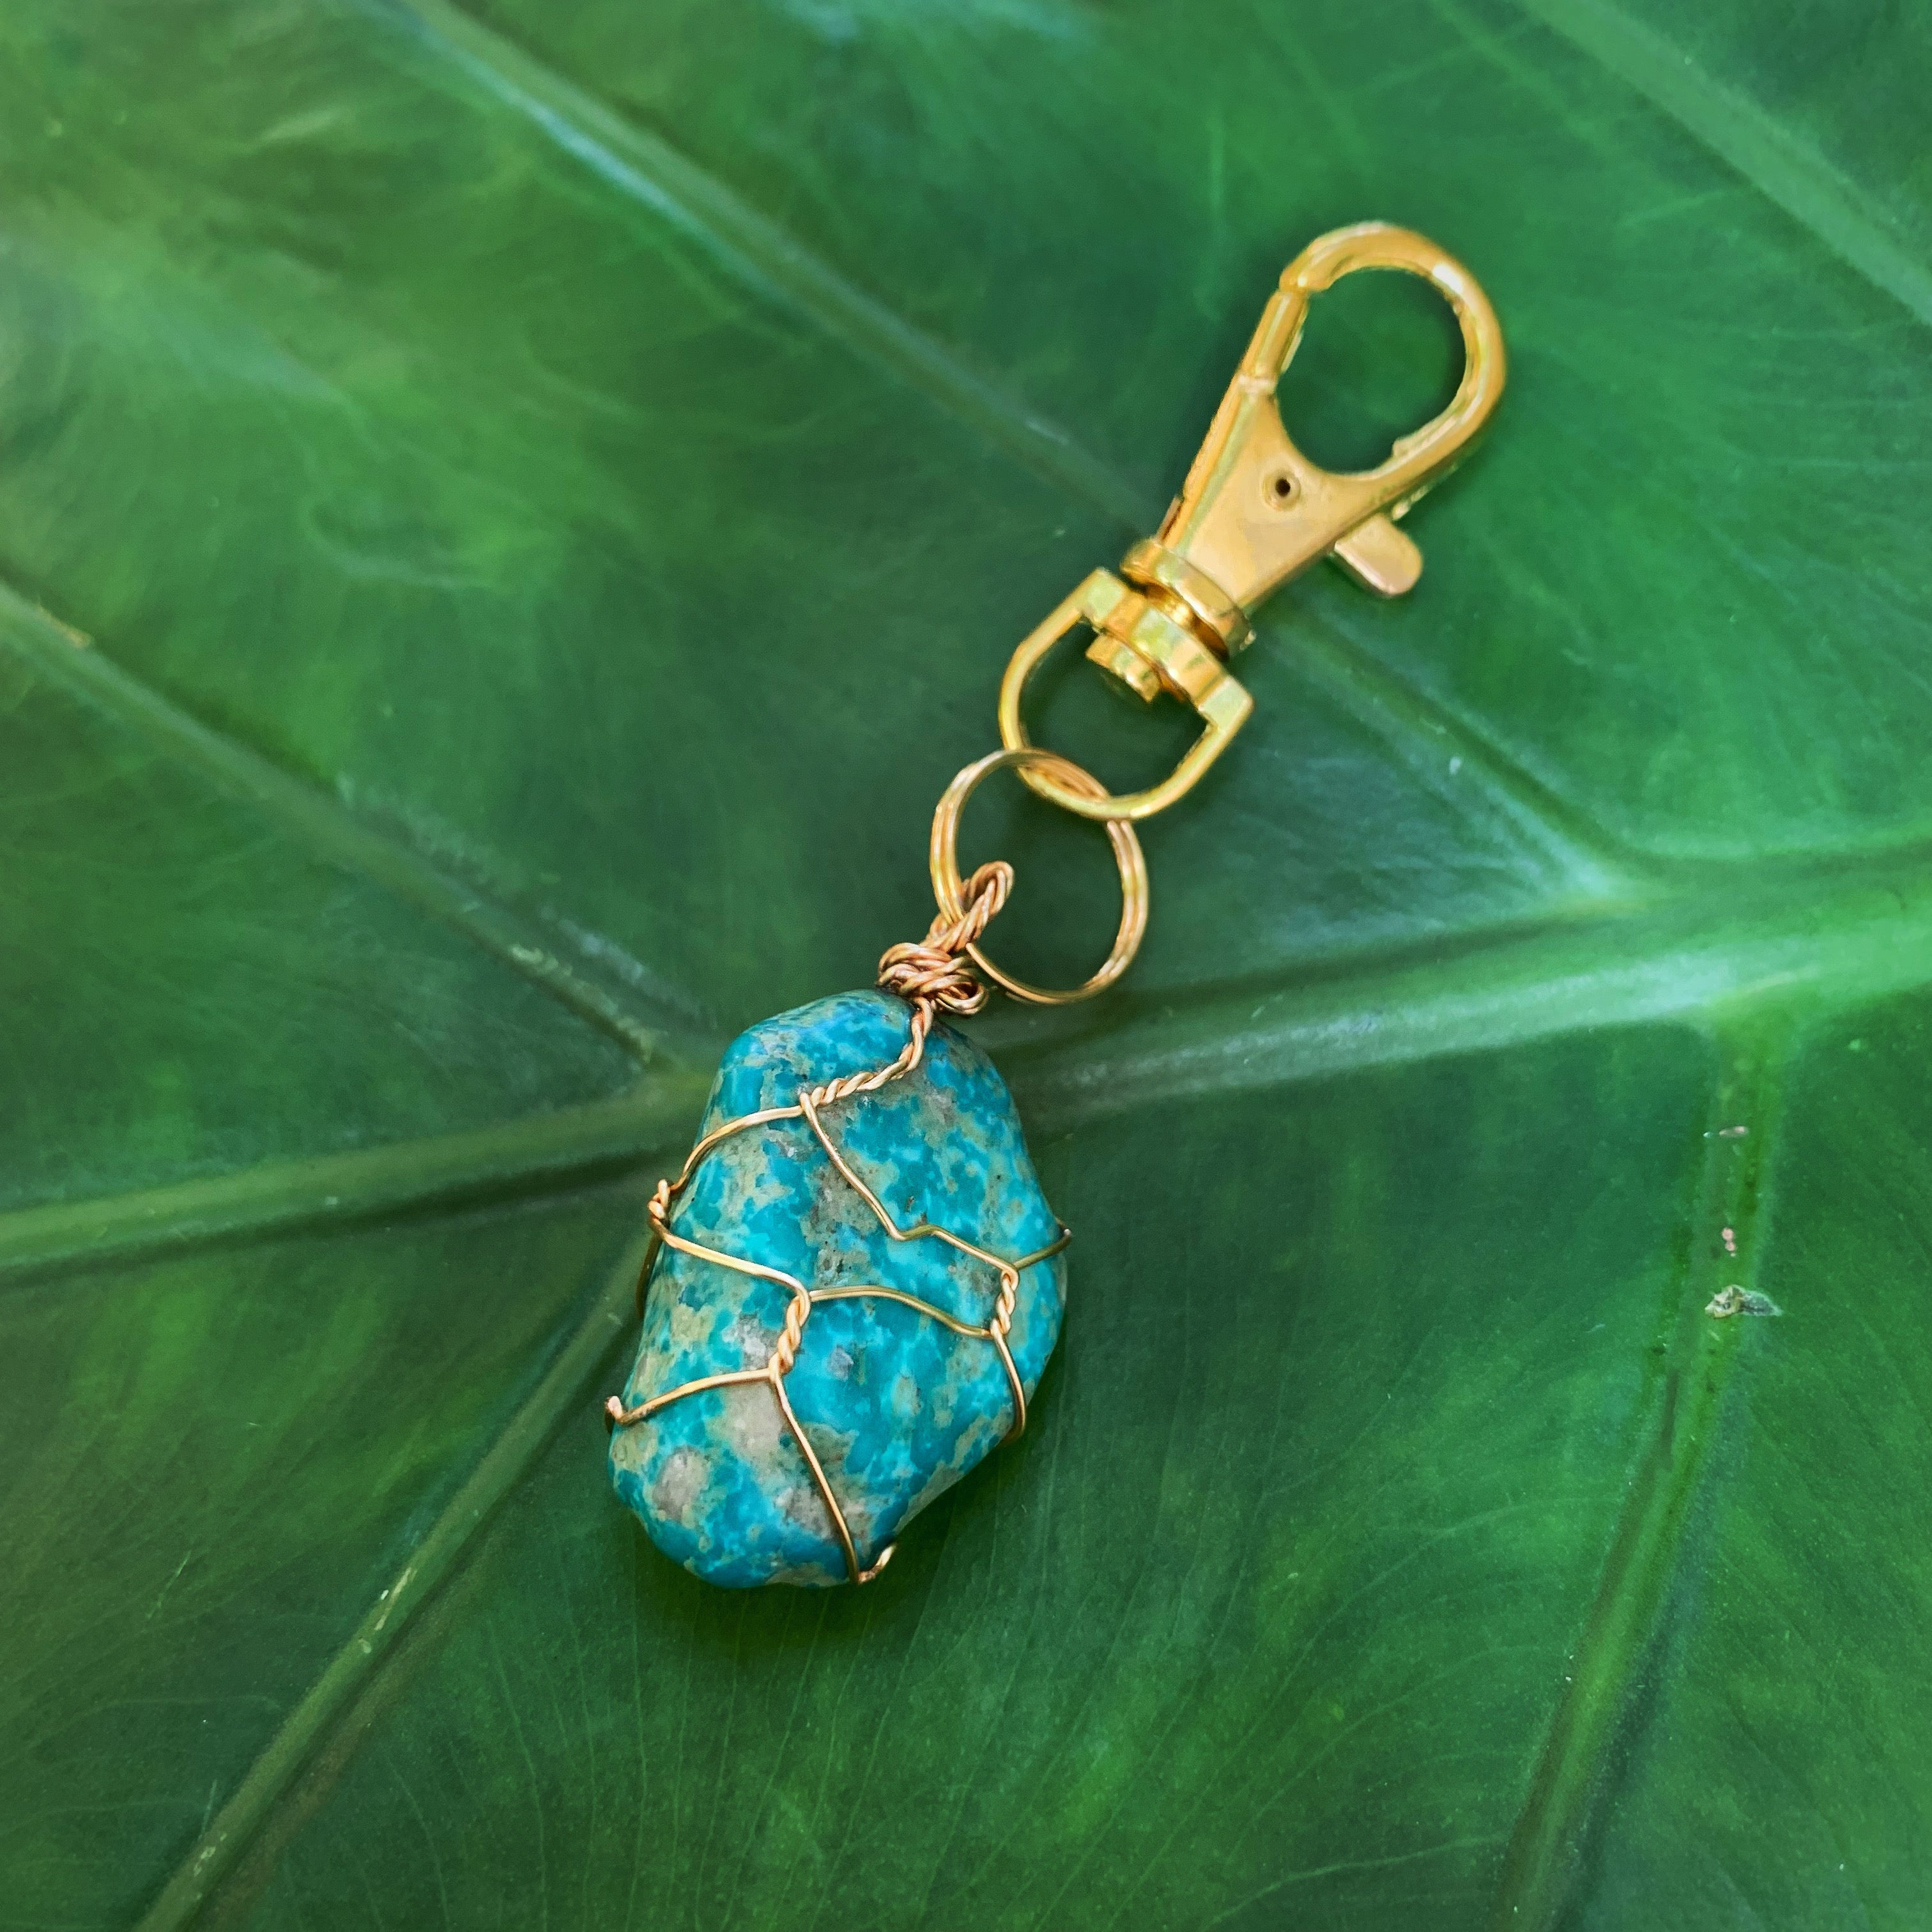 Turquoise in Golden Keychain